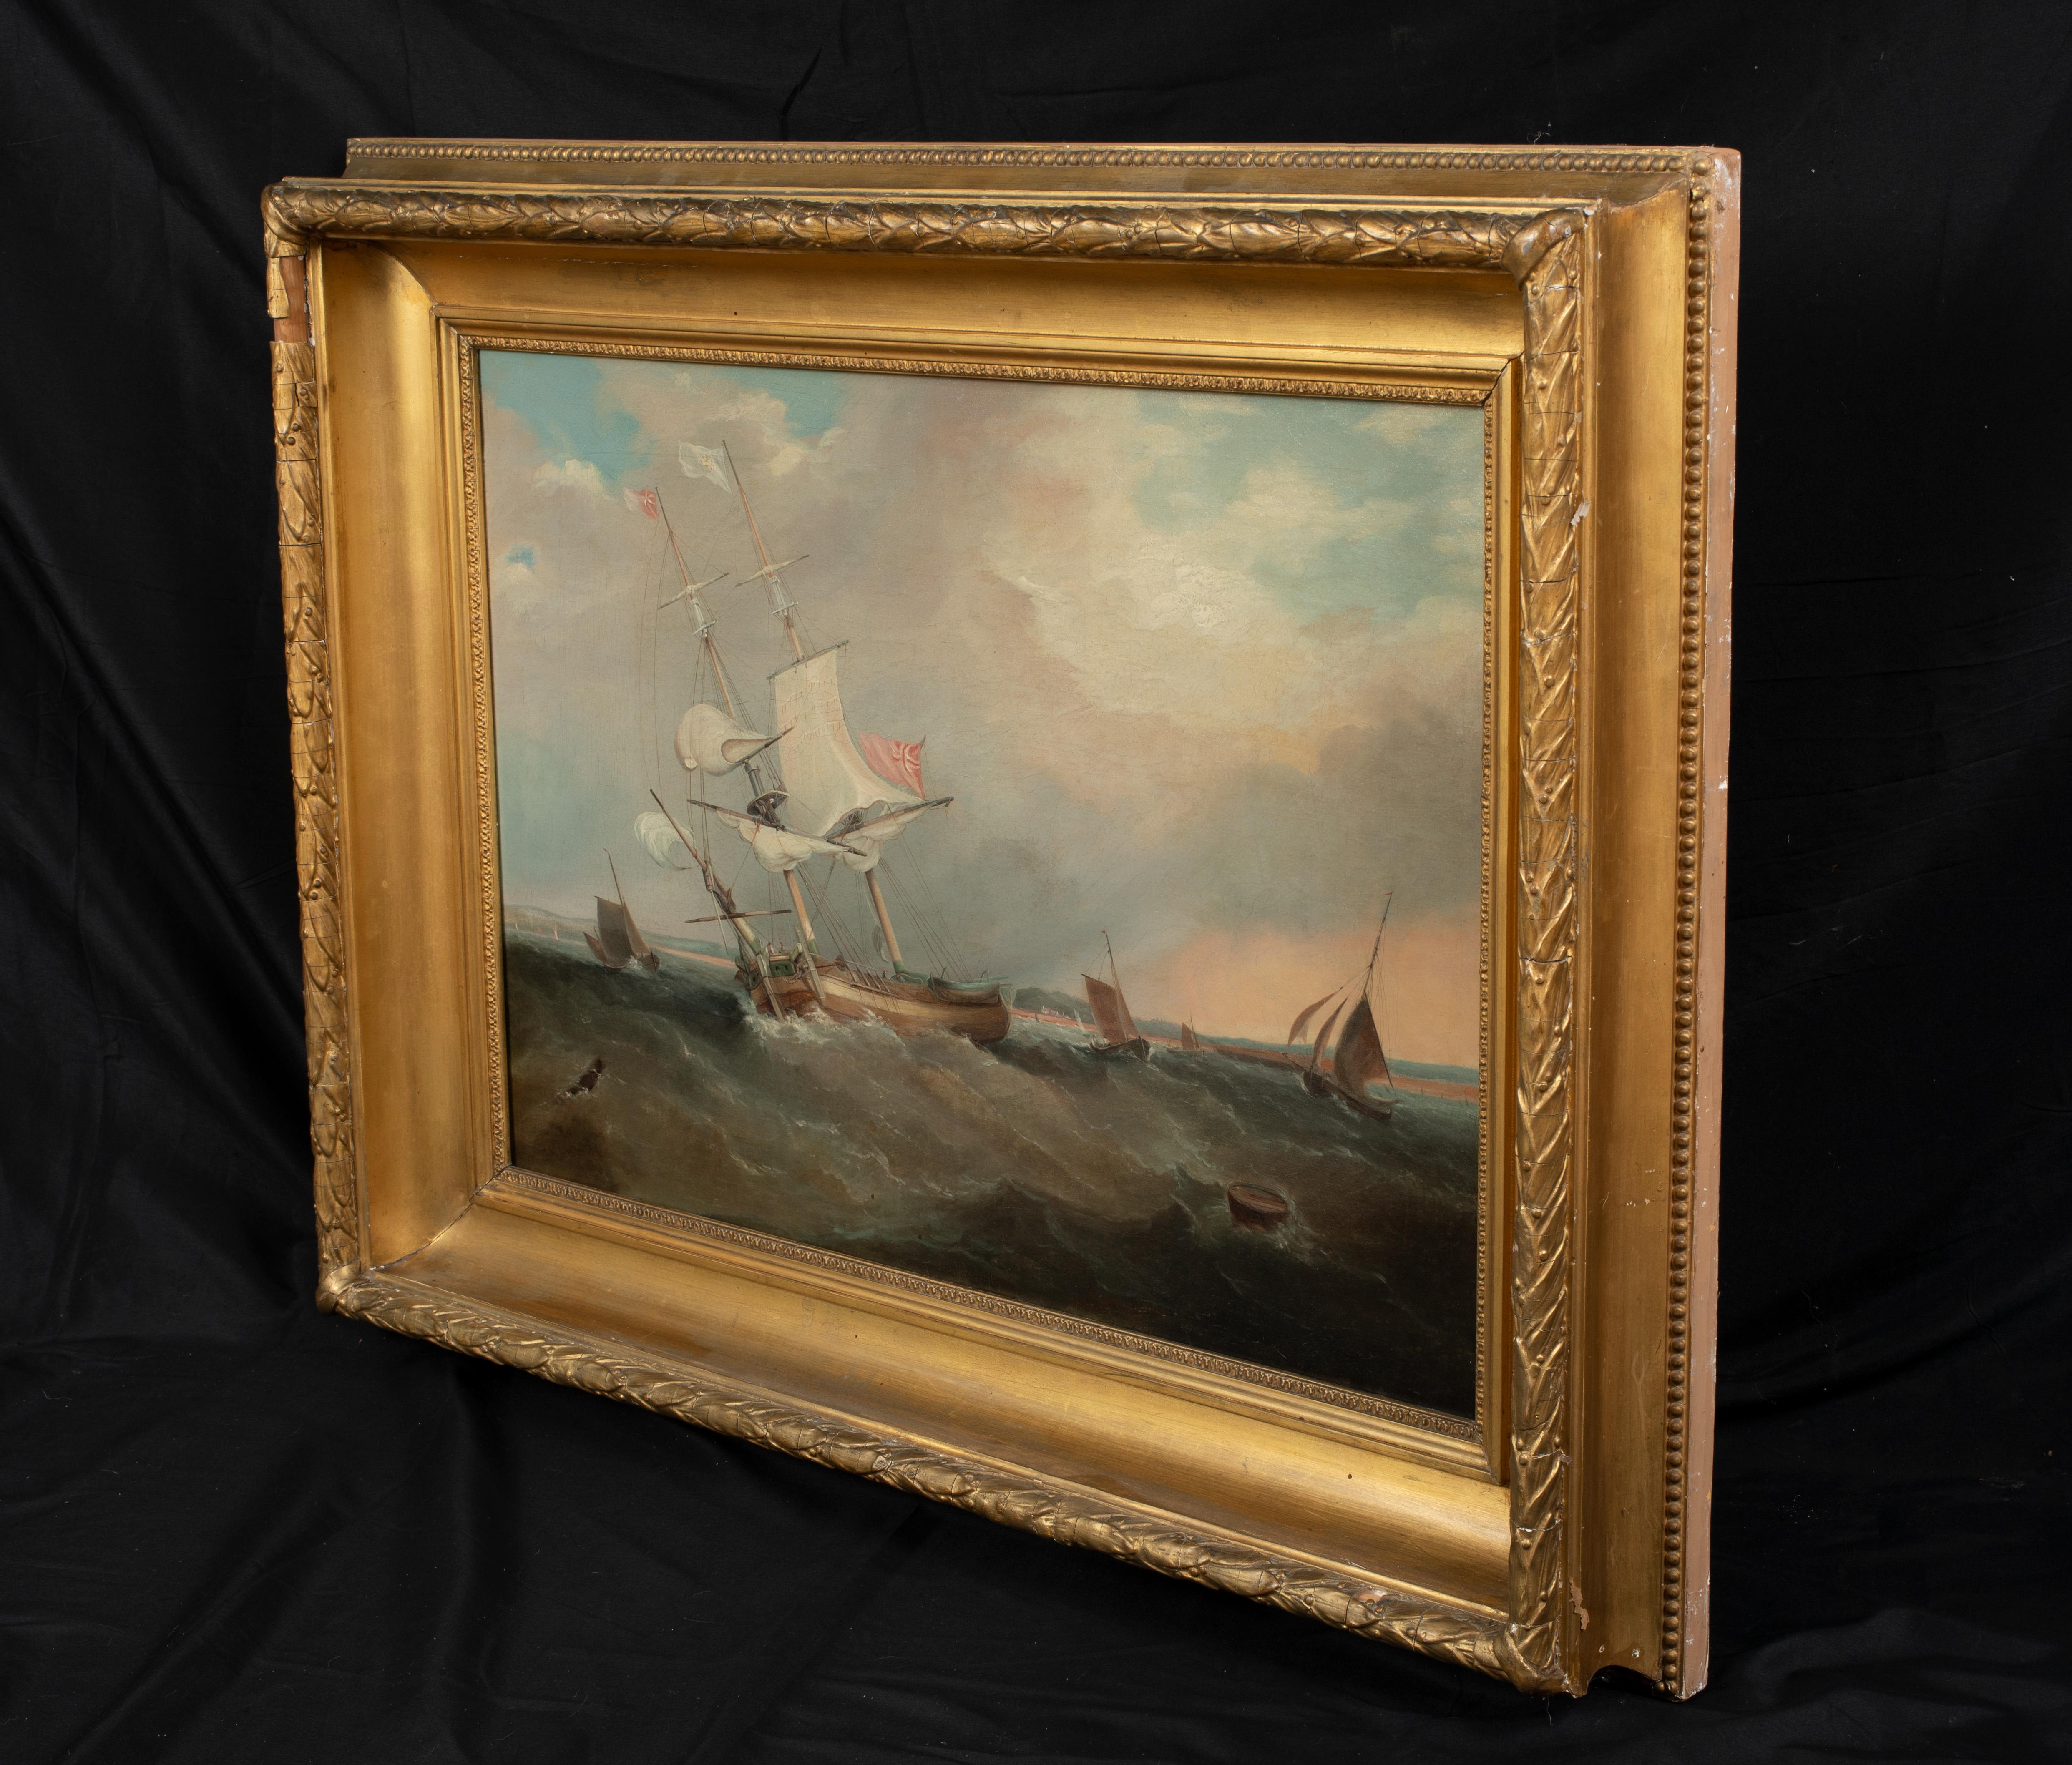 British Royal Navy Frigate In Choppy Waters, 19th Century 

circle of Henry Redmore (1820-1887)

Large 19th Century English School study of a British Royal Navy Frigate, oil on canvas. Excellent quality and condition work on a large scale by an